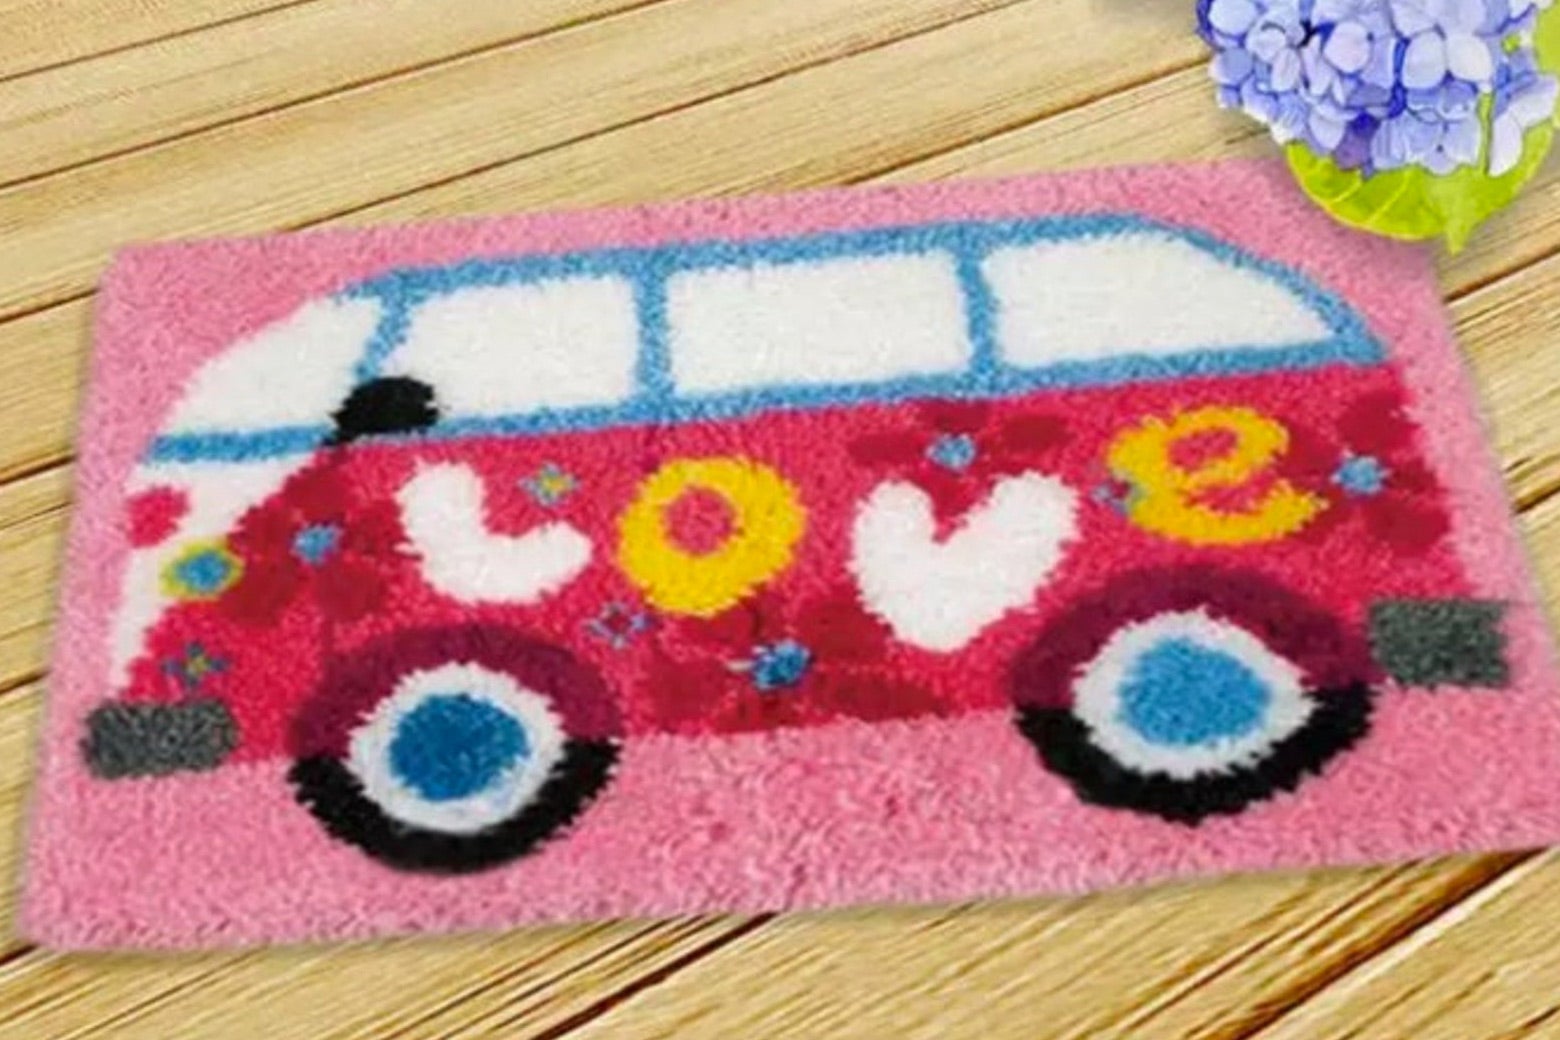 A rug with a bus that says love on the side.